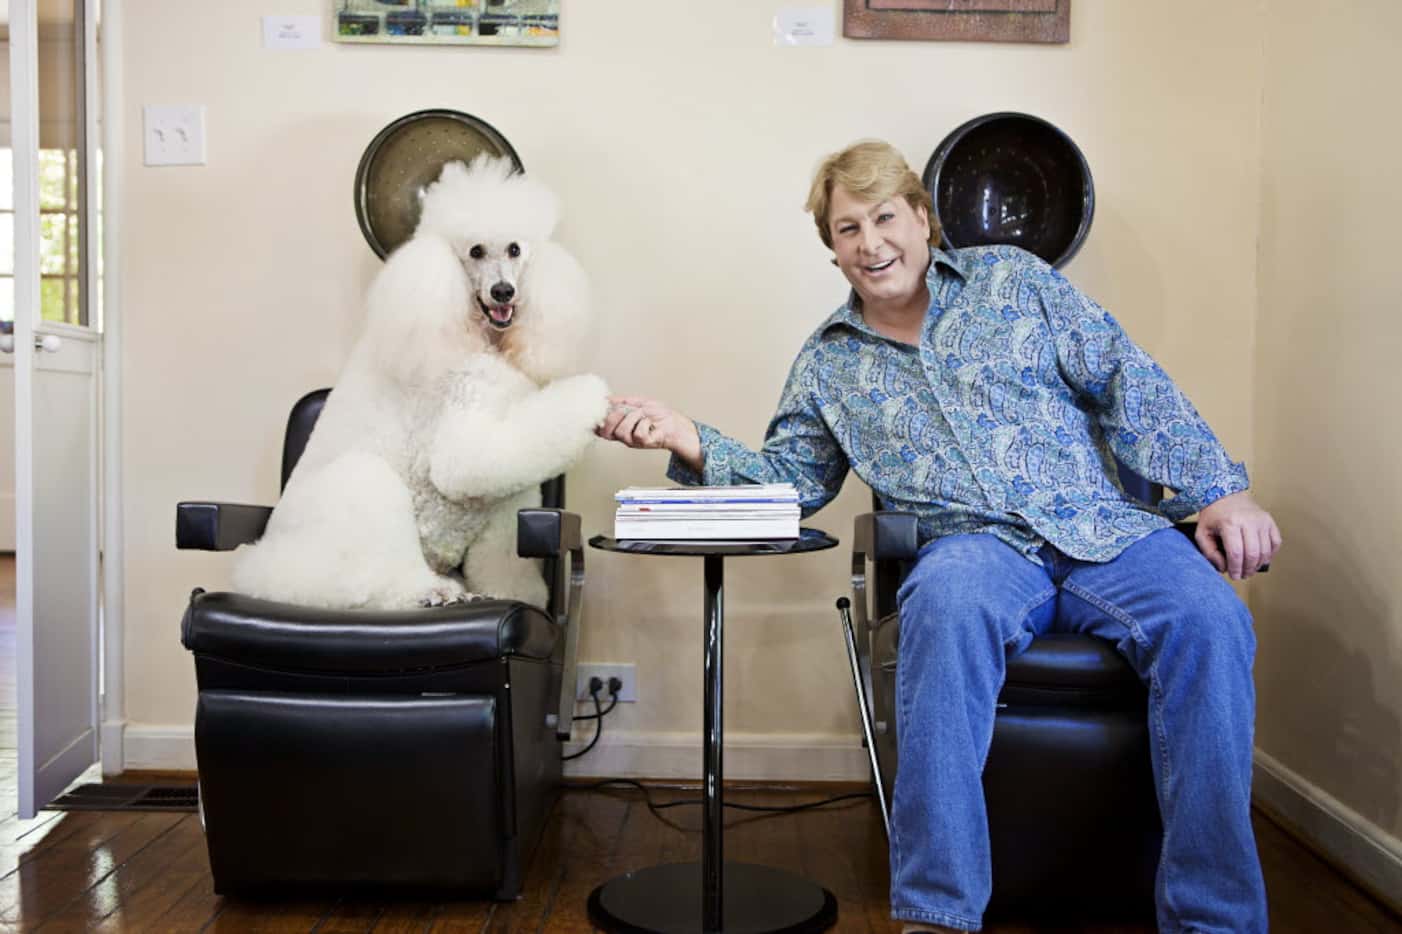 Dallas hair stylist Paul Neinast and his poodle Leopold, photographed September 9, 2011 